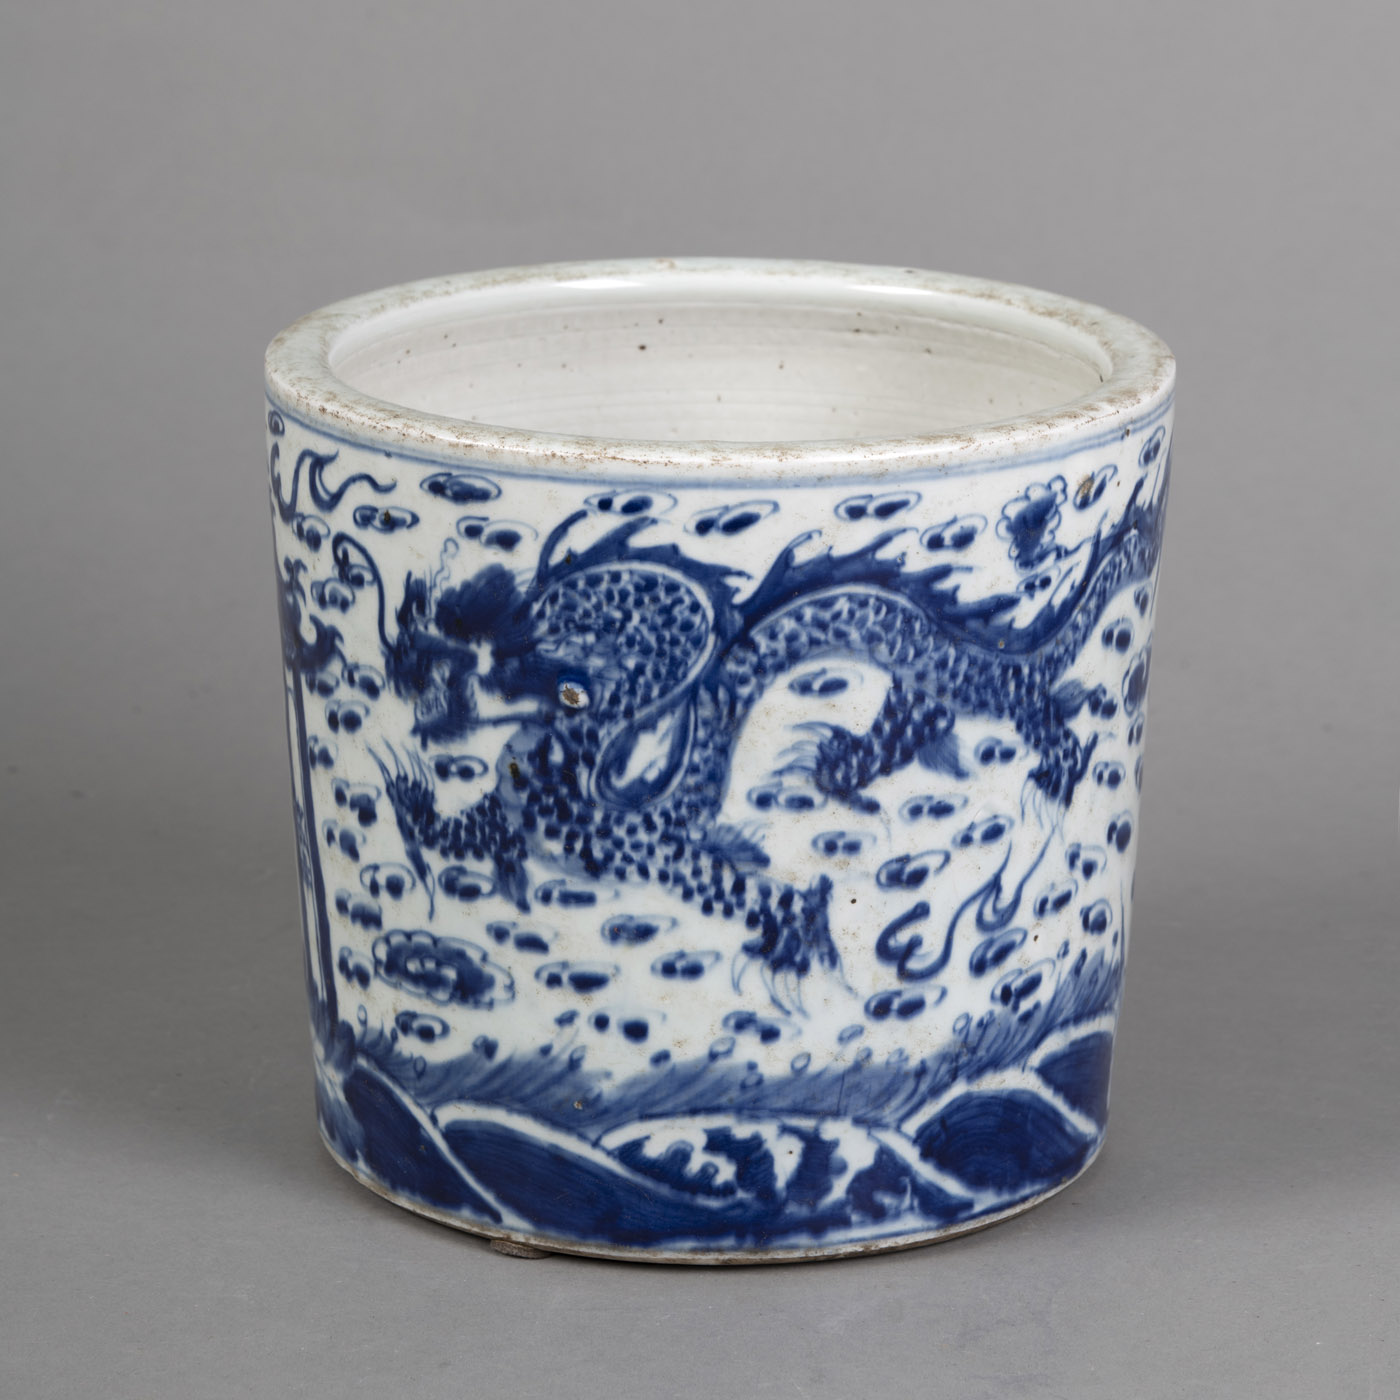 <b>A BLUE AND WHITE PORCELAIN CACHEPOT DEPICTING A SHRINE SURROUNDED BY TWO DRAGONS</b>